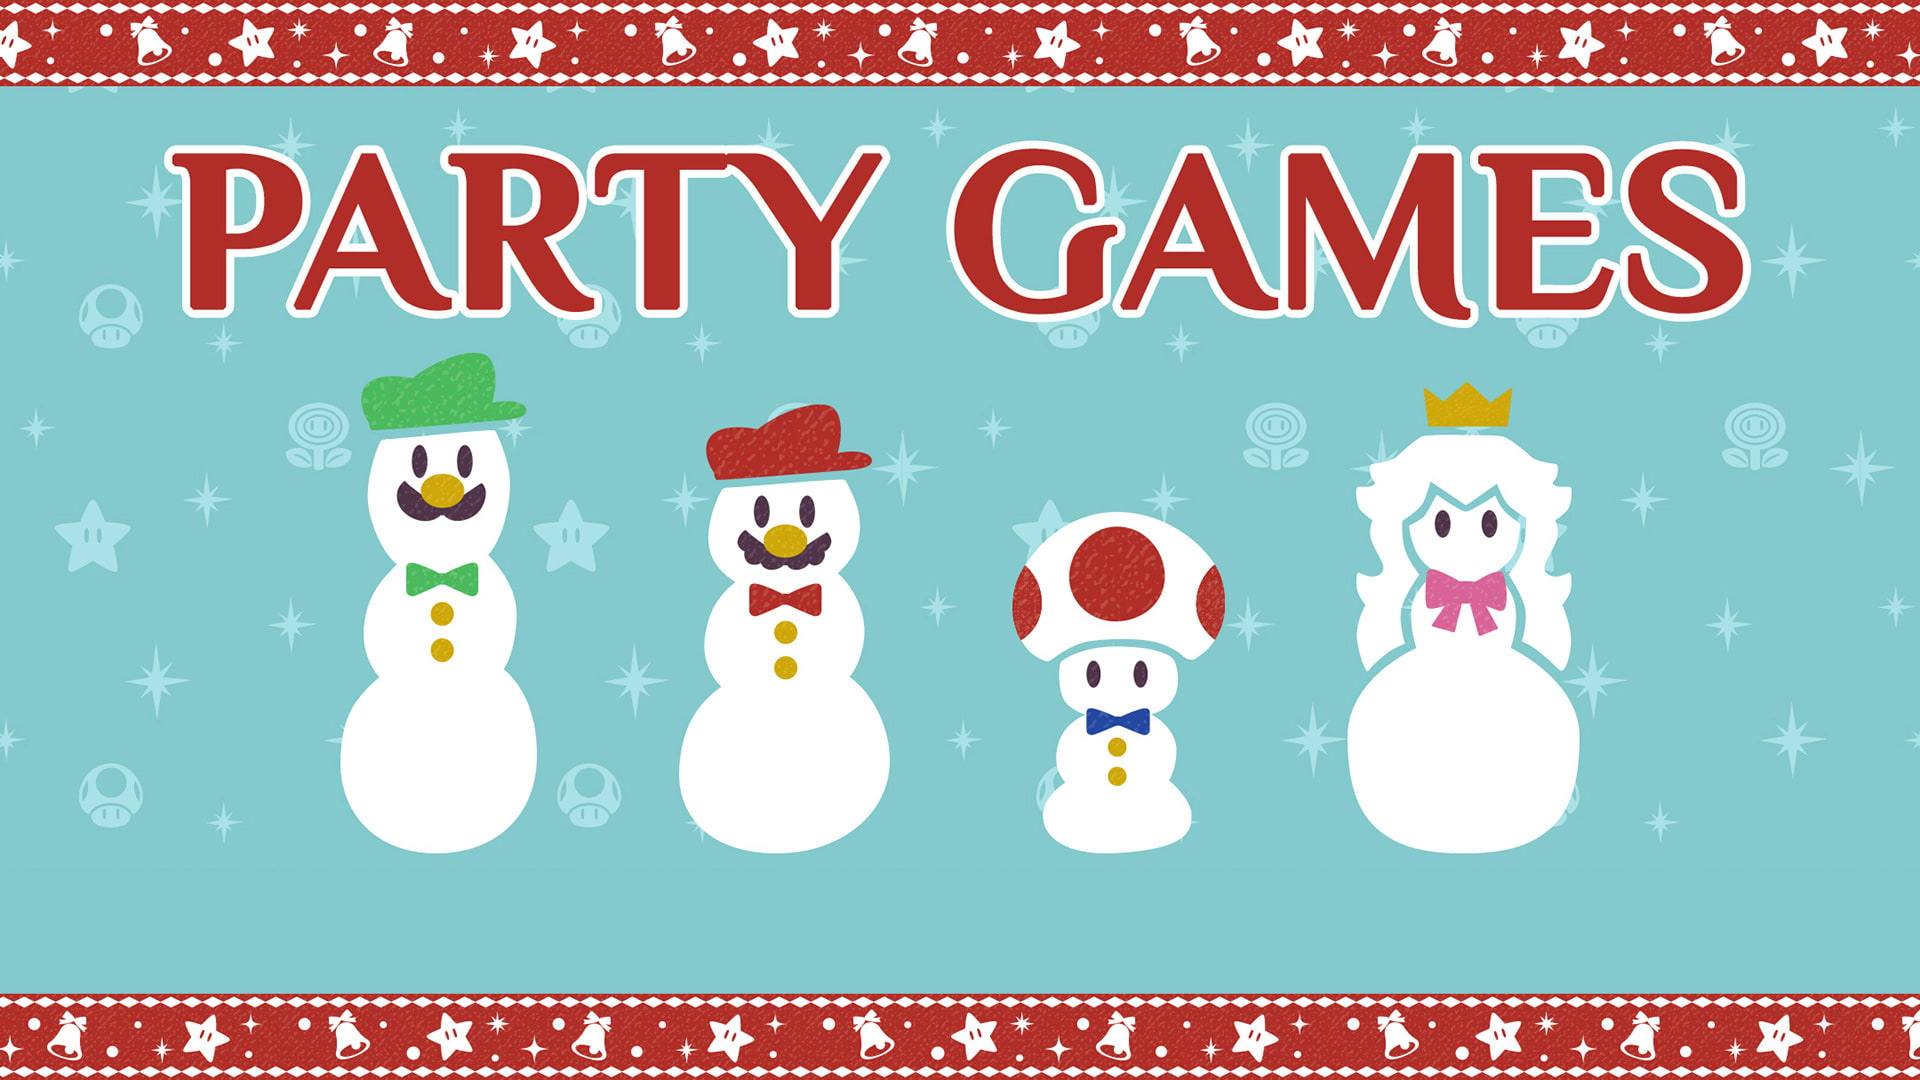 Enjoy the holiday season with these party games! Hero Image